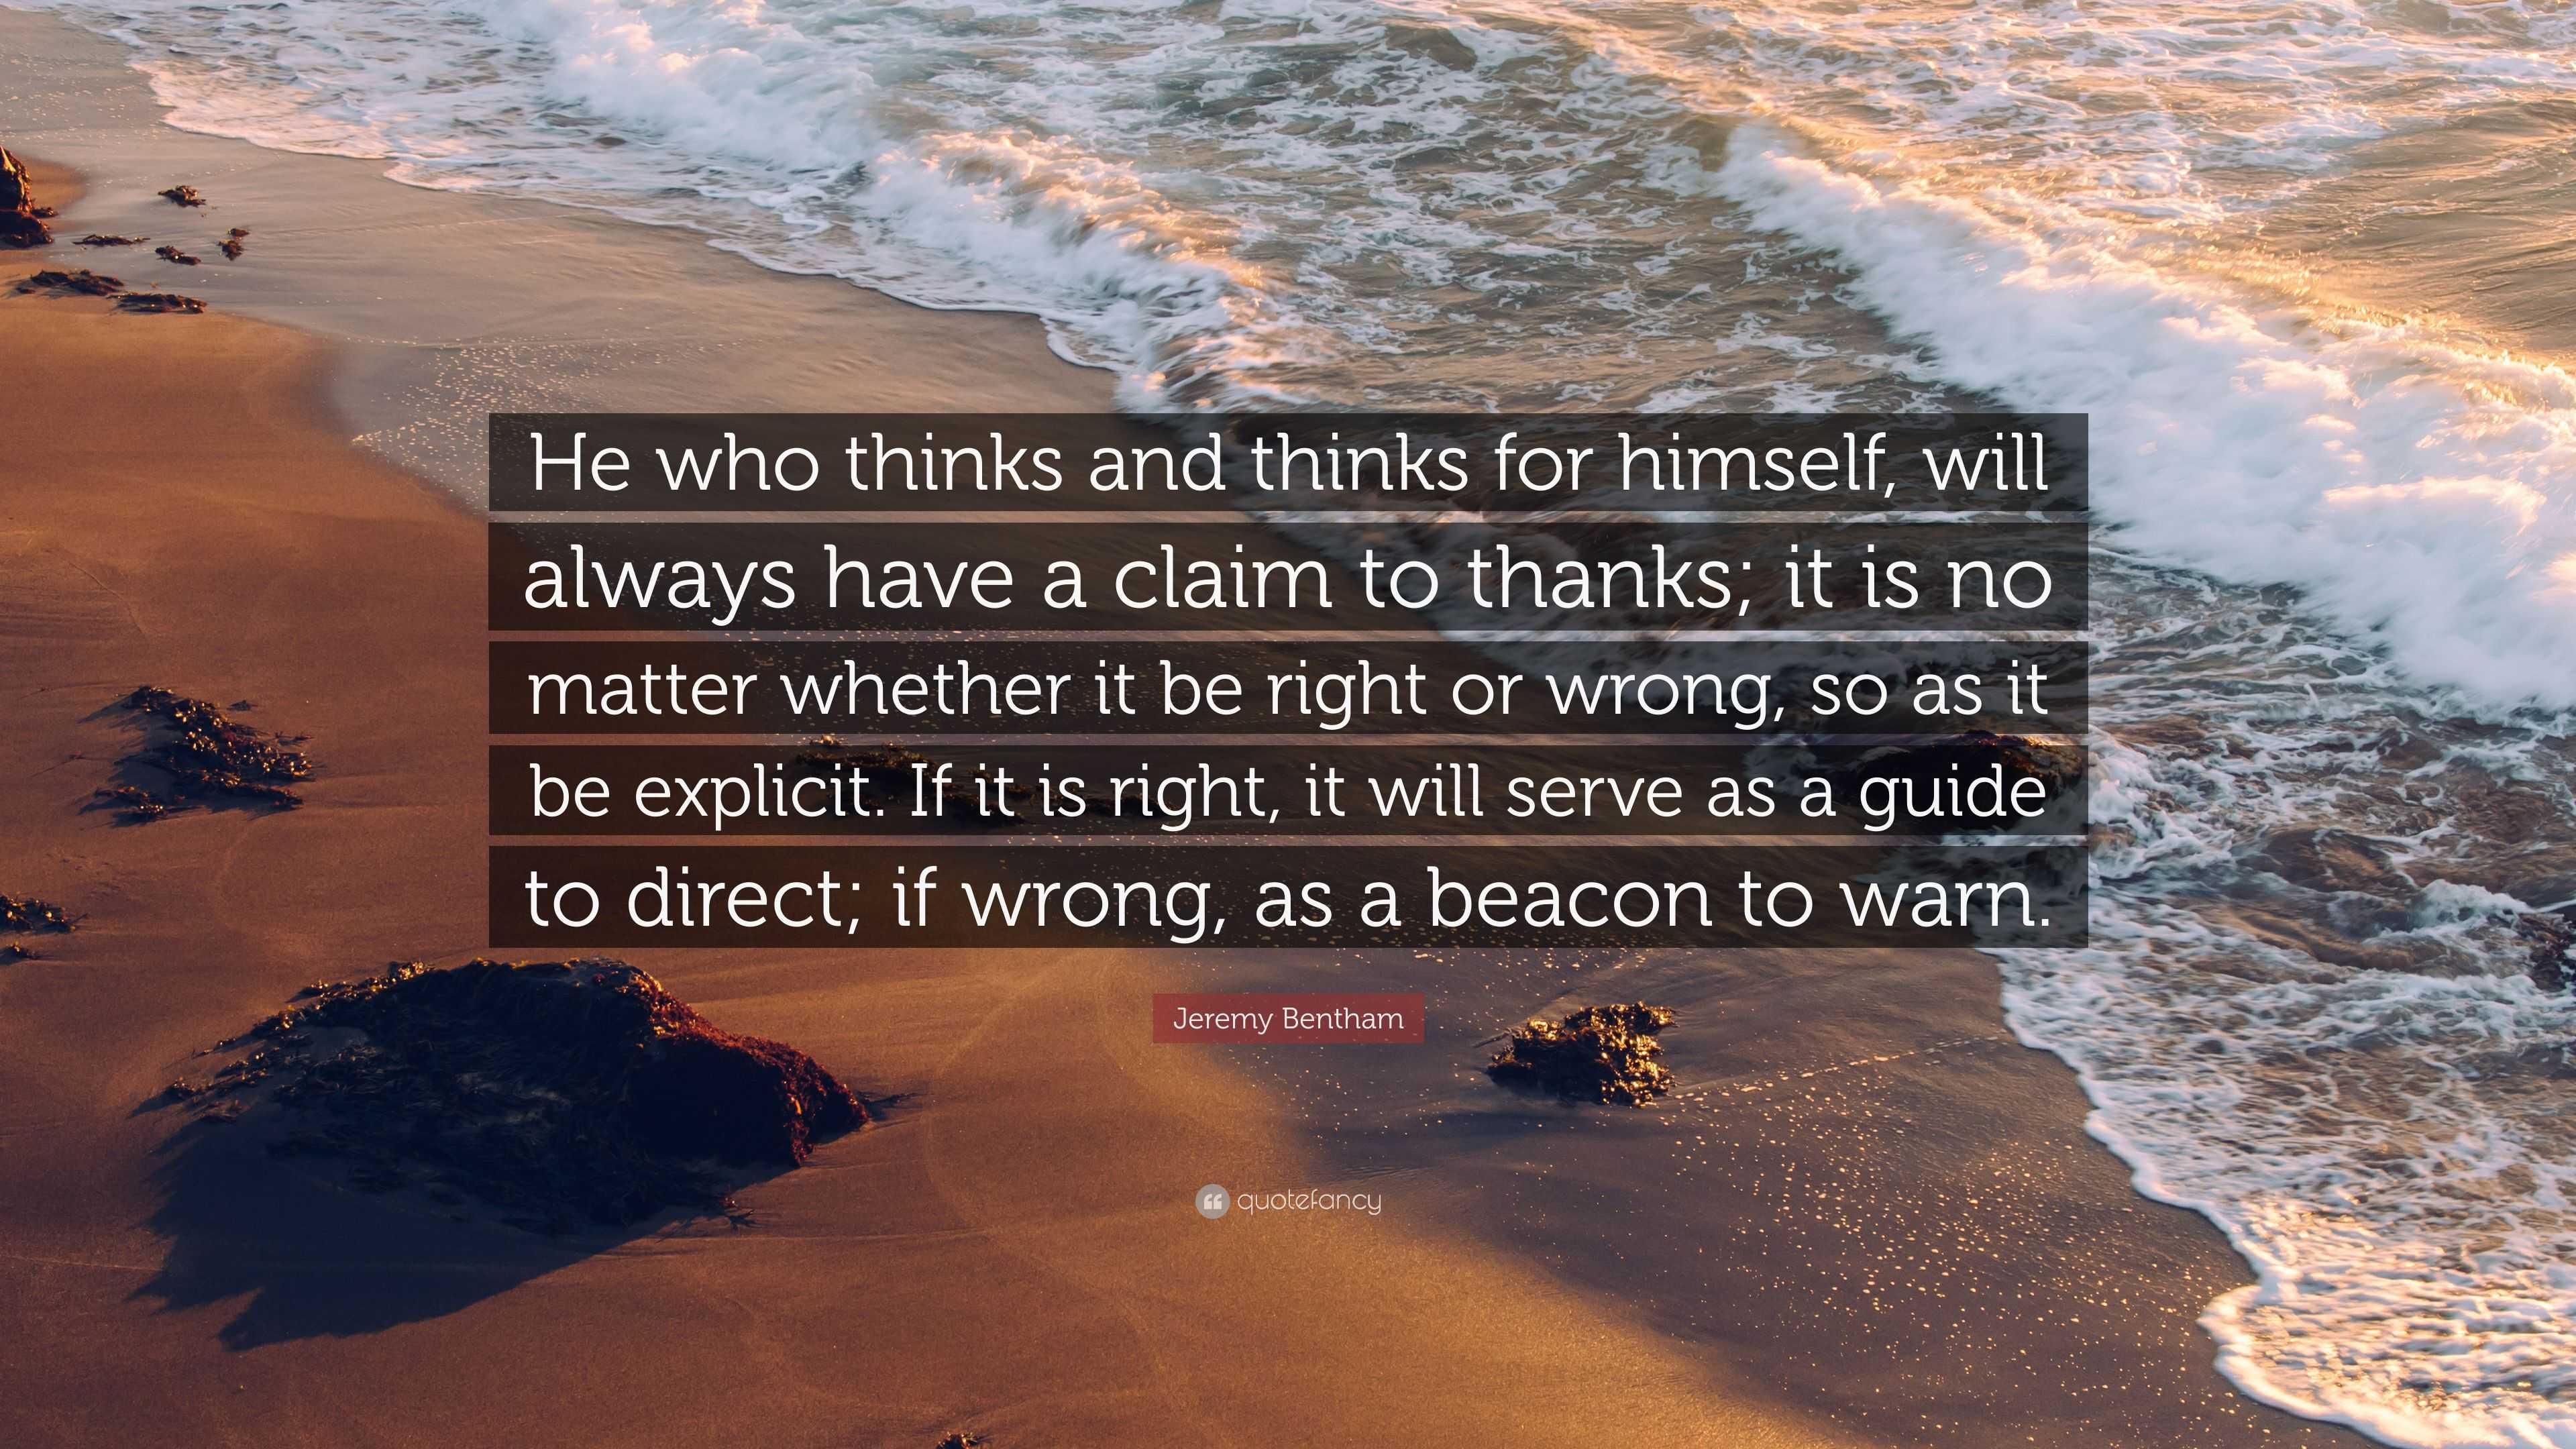 Jeremy Bentham Quote: “He who thinks and thinks for himself, will ...